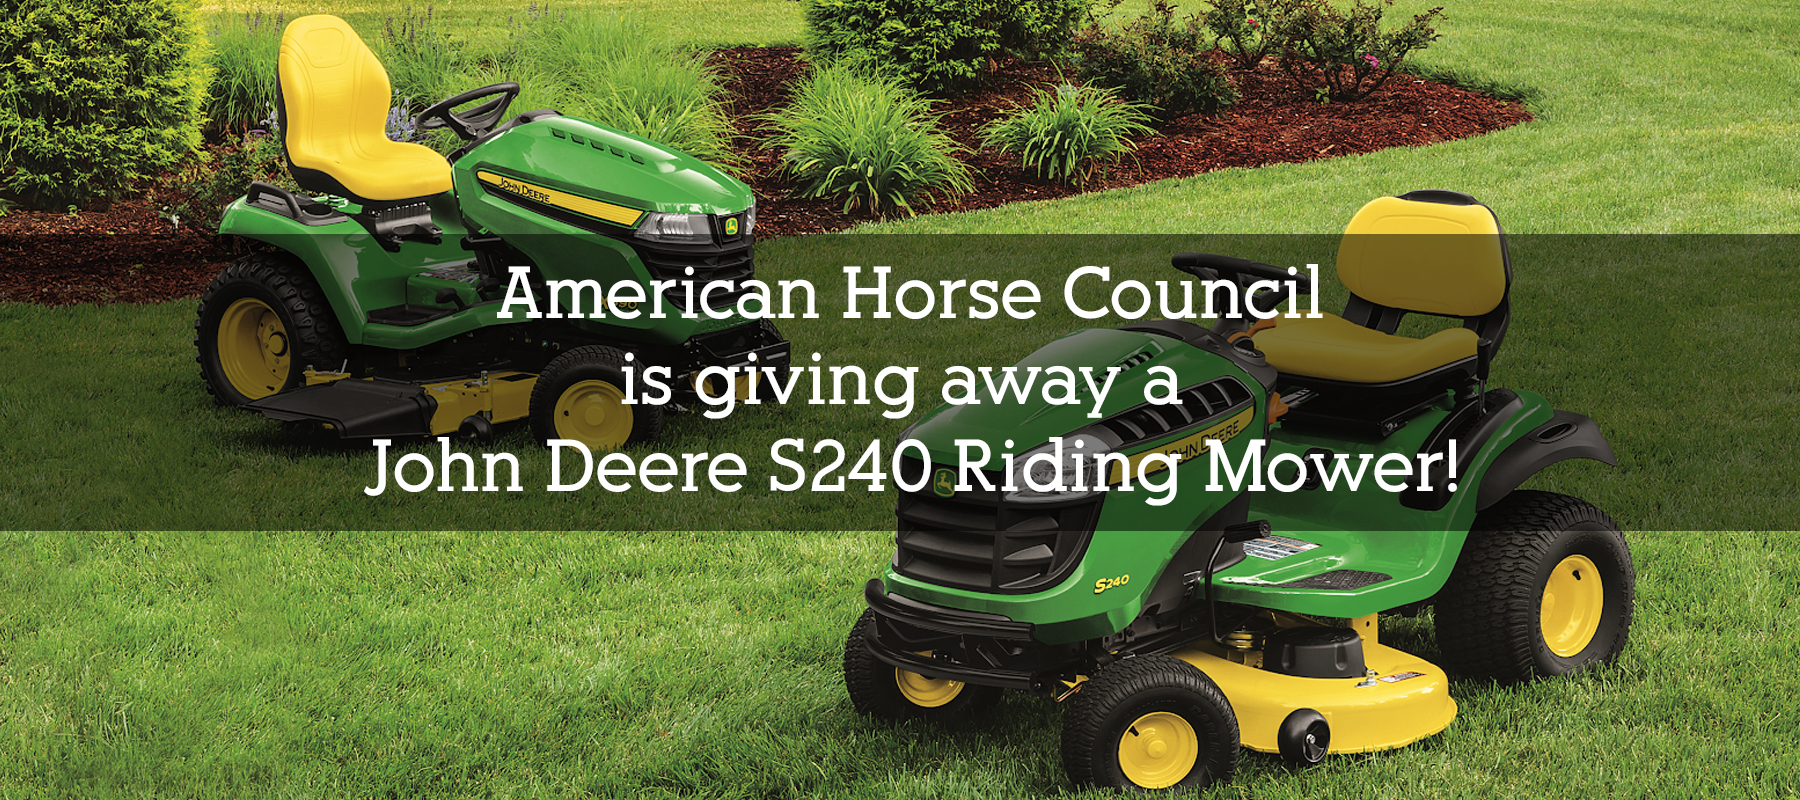 American Horse Council is giving away a John Deere S240 Riding Mower!